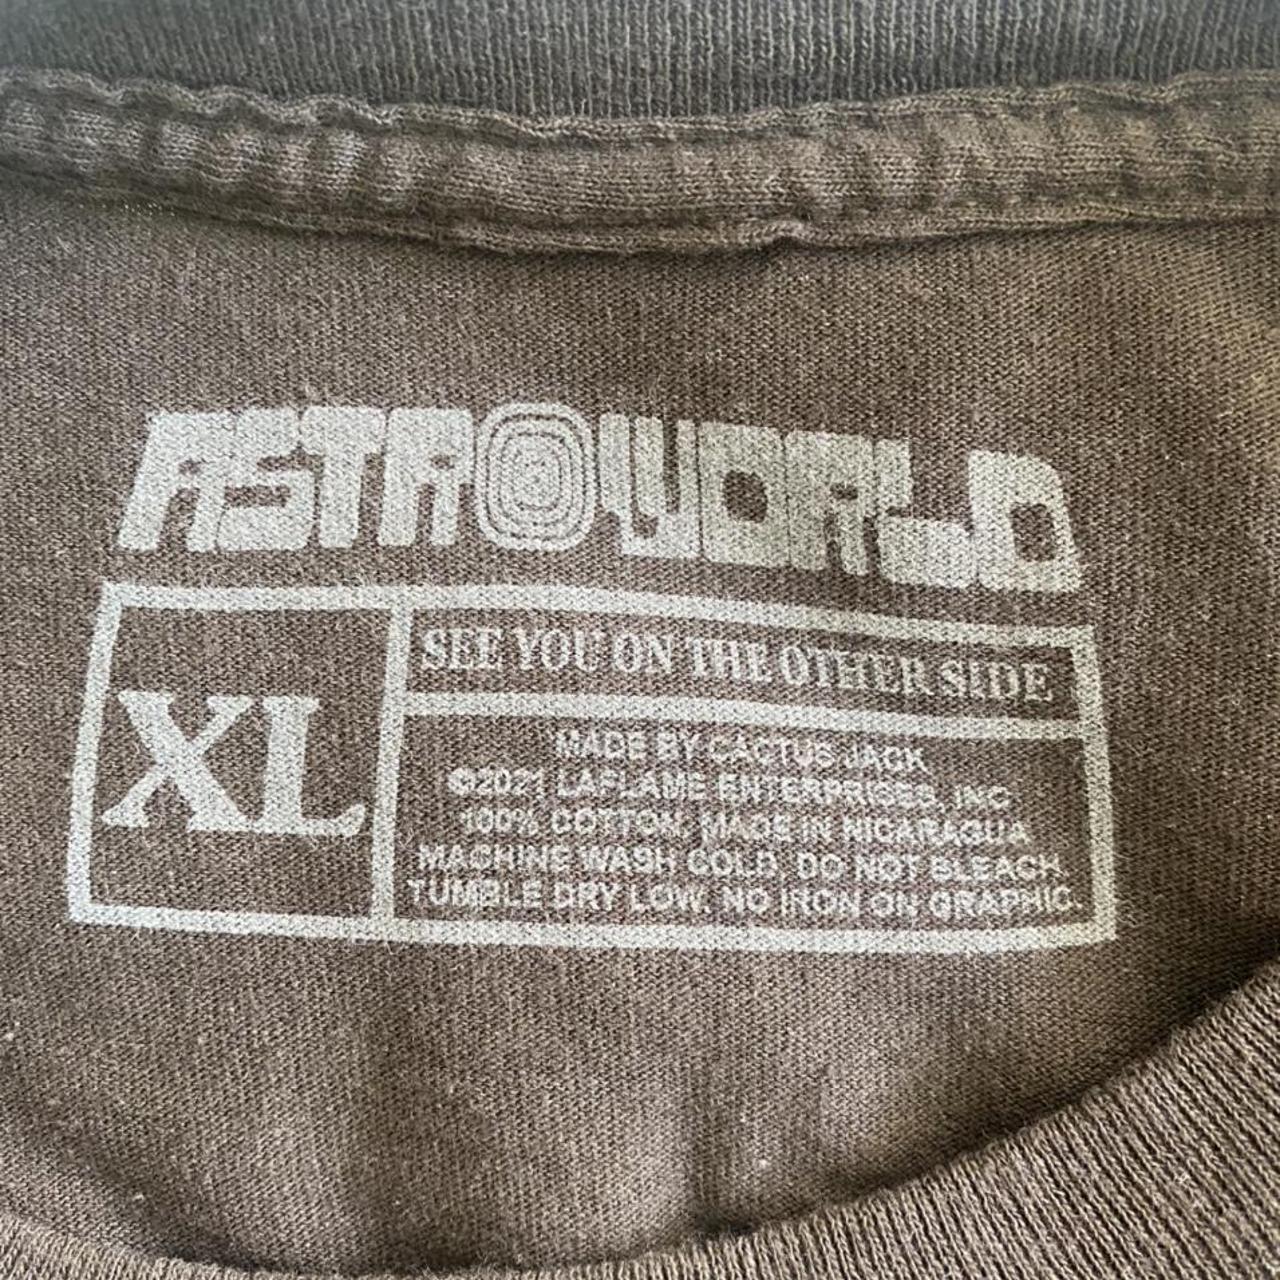 2021 OFFICIAL ASTROWORLD MERCH, brown long sleeve